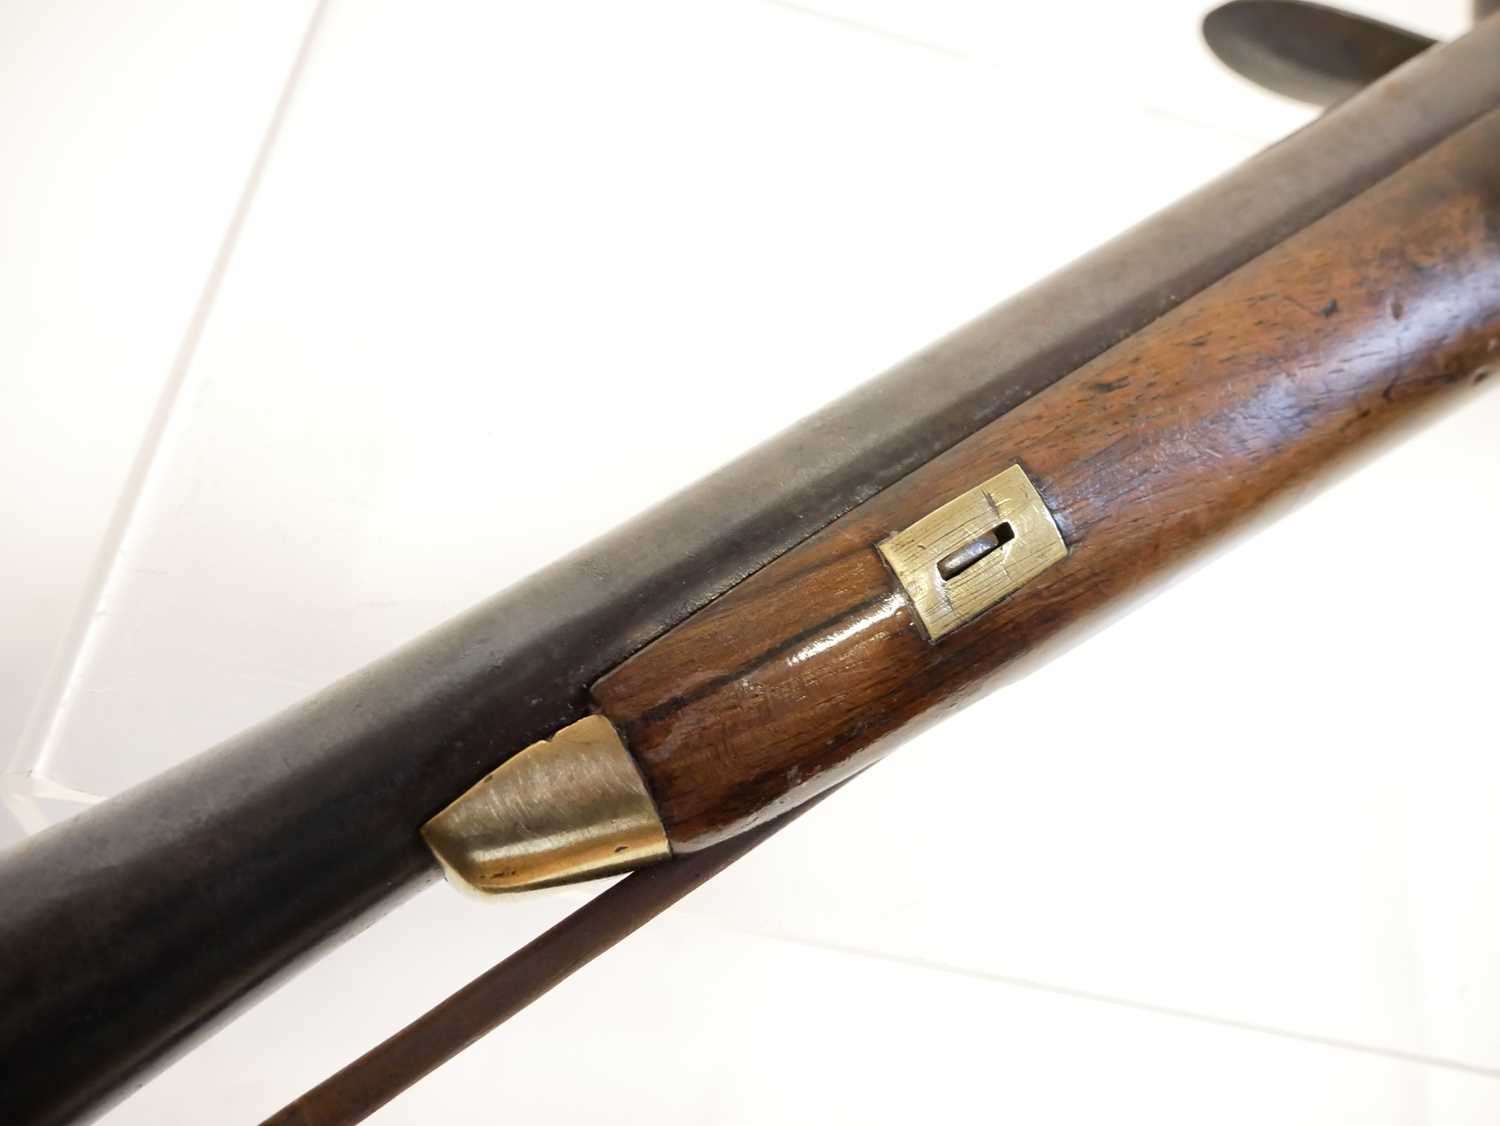 Belgian flintlock blunderbuss pistol, 13 inch barrel with flaring muzzle, stamped with Liege proof - Image 9 of 9